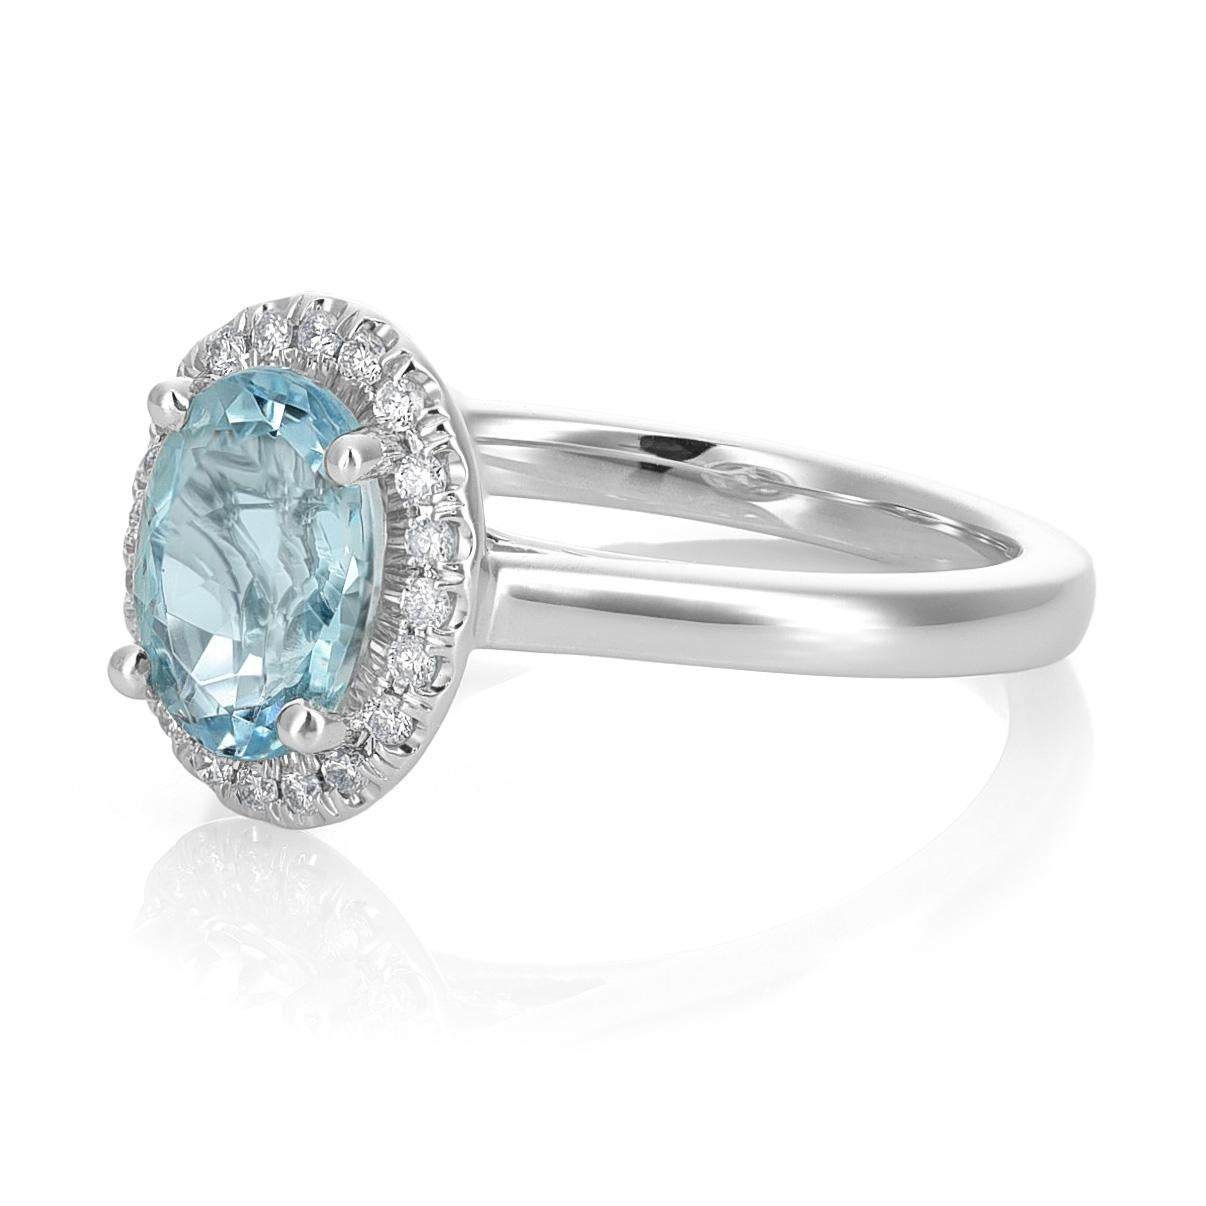 Introducing a radiant piece of elegance – a 14K White Gold ring featuring a breathtaking 1.76 carats oval-shaped Natural Aquamarine, enhanced by the sparkle of 0.15 carats of Diamonds. The exquisite design and the heated aquamarine blend seamlessly,